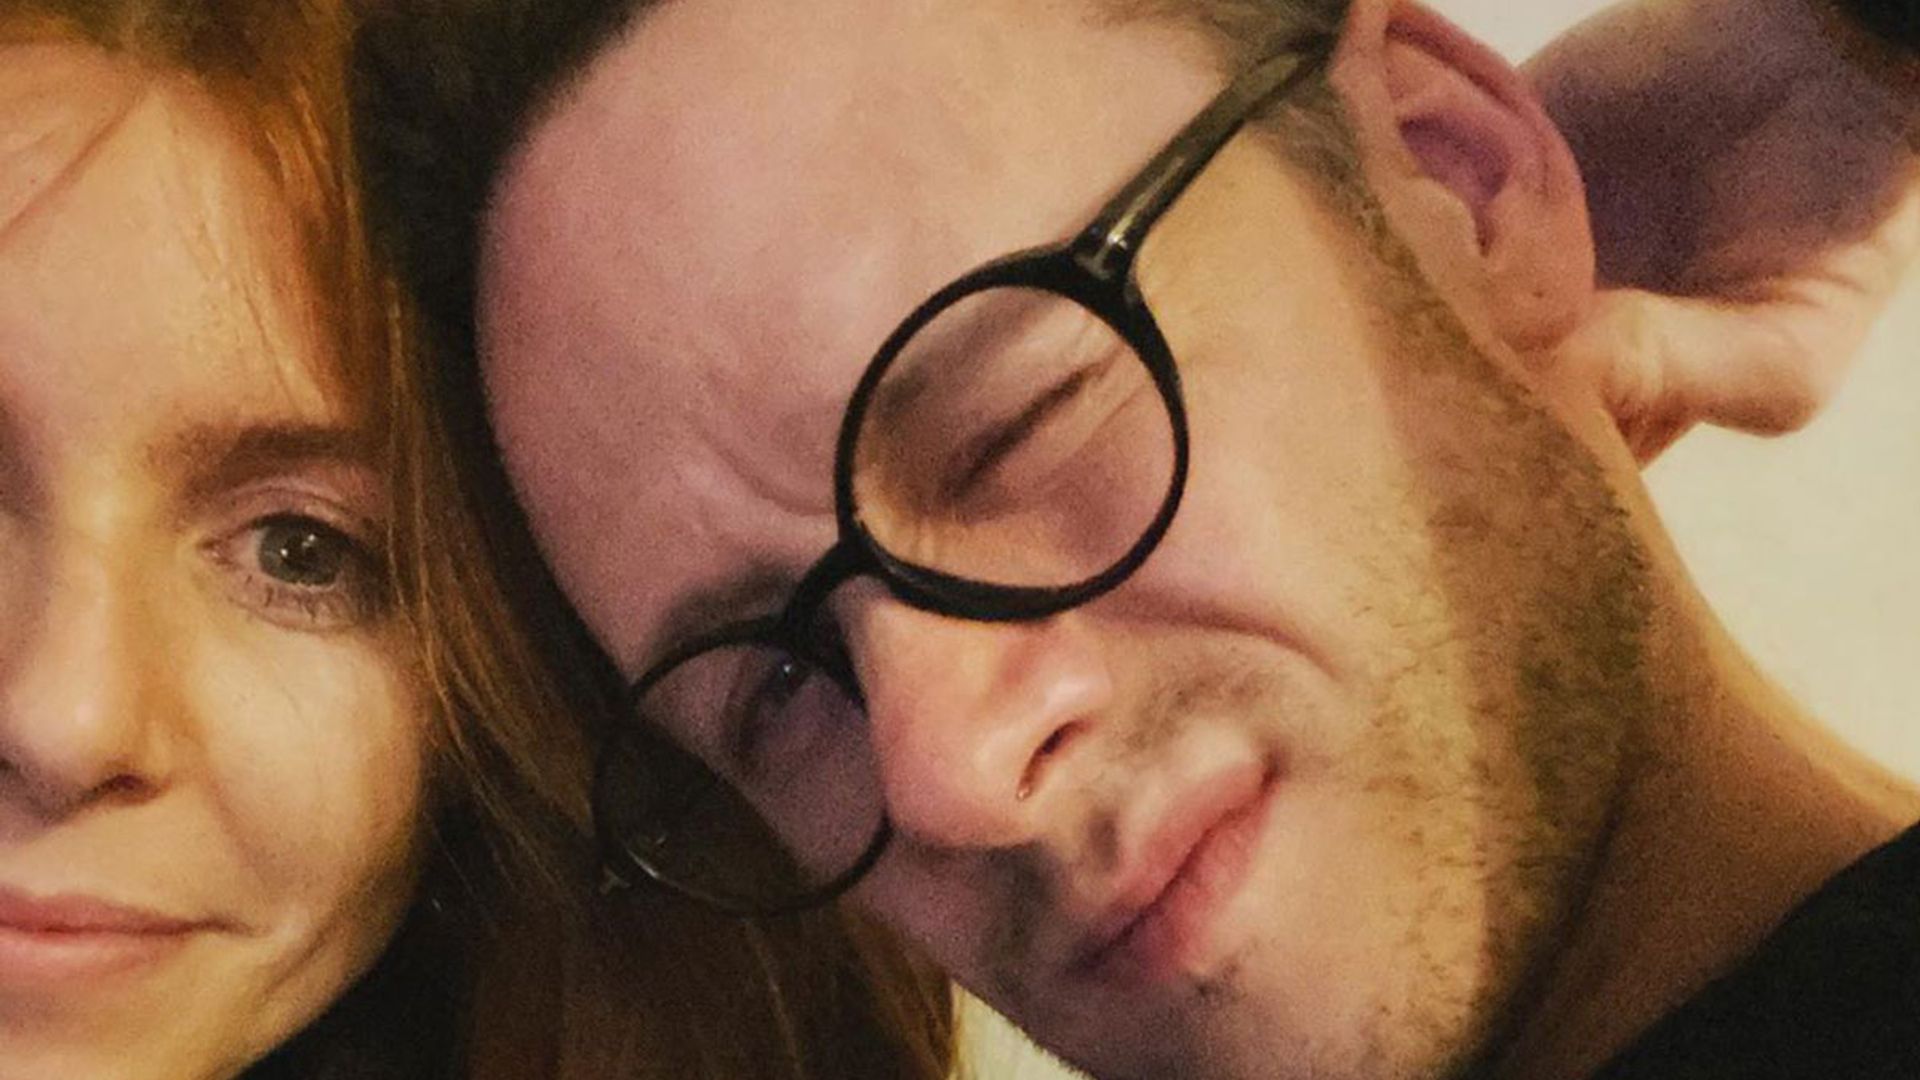 kevin clifton stacey dooley